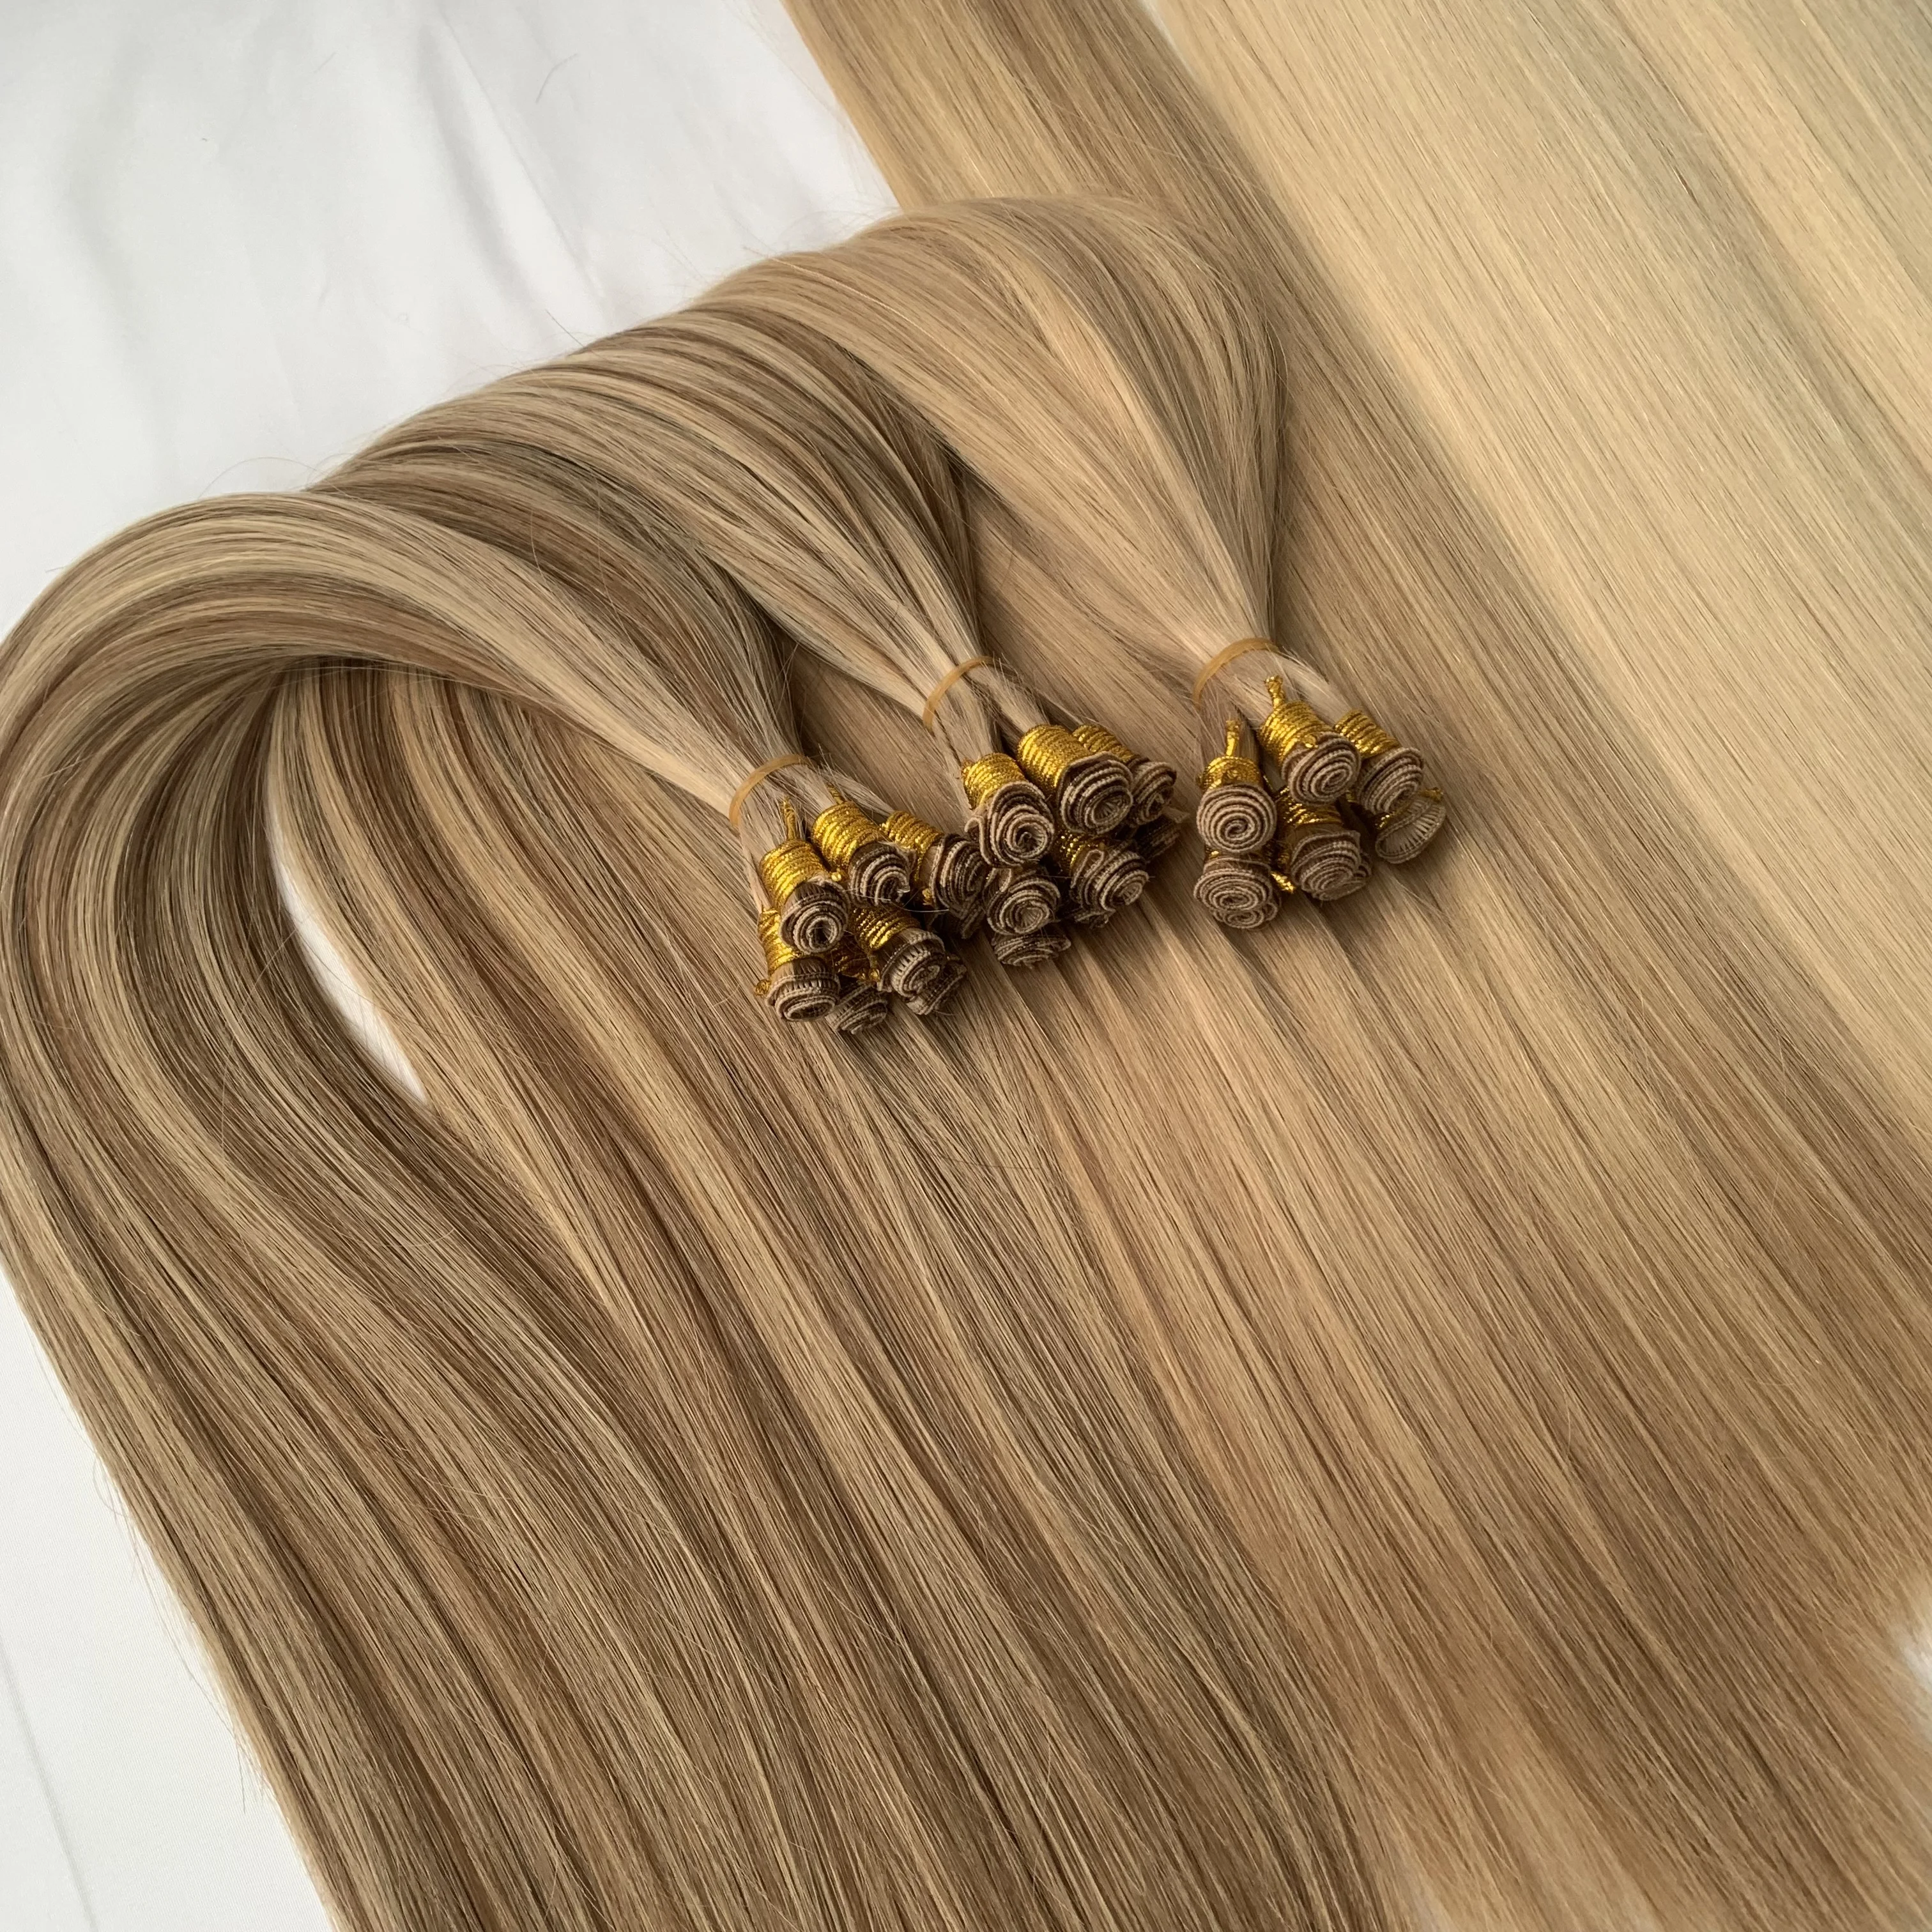 

100% Russian Human Virgin Remy Hair Extensions Wholesale High Quality Straight Hand Tied Weft Double Drawn Hair For Women, All color